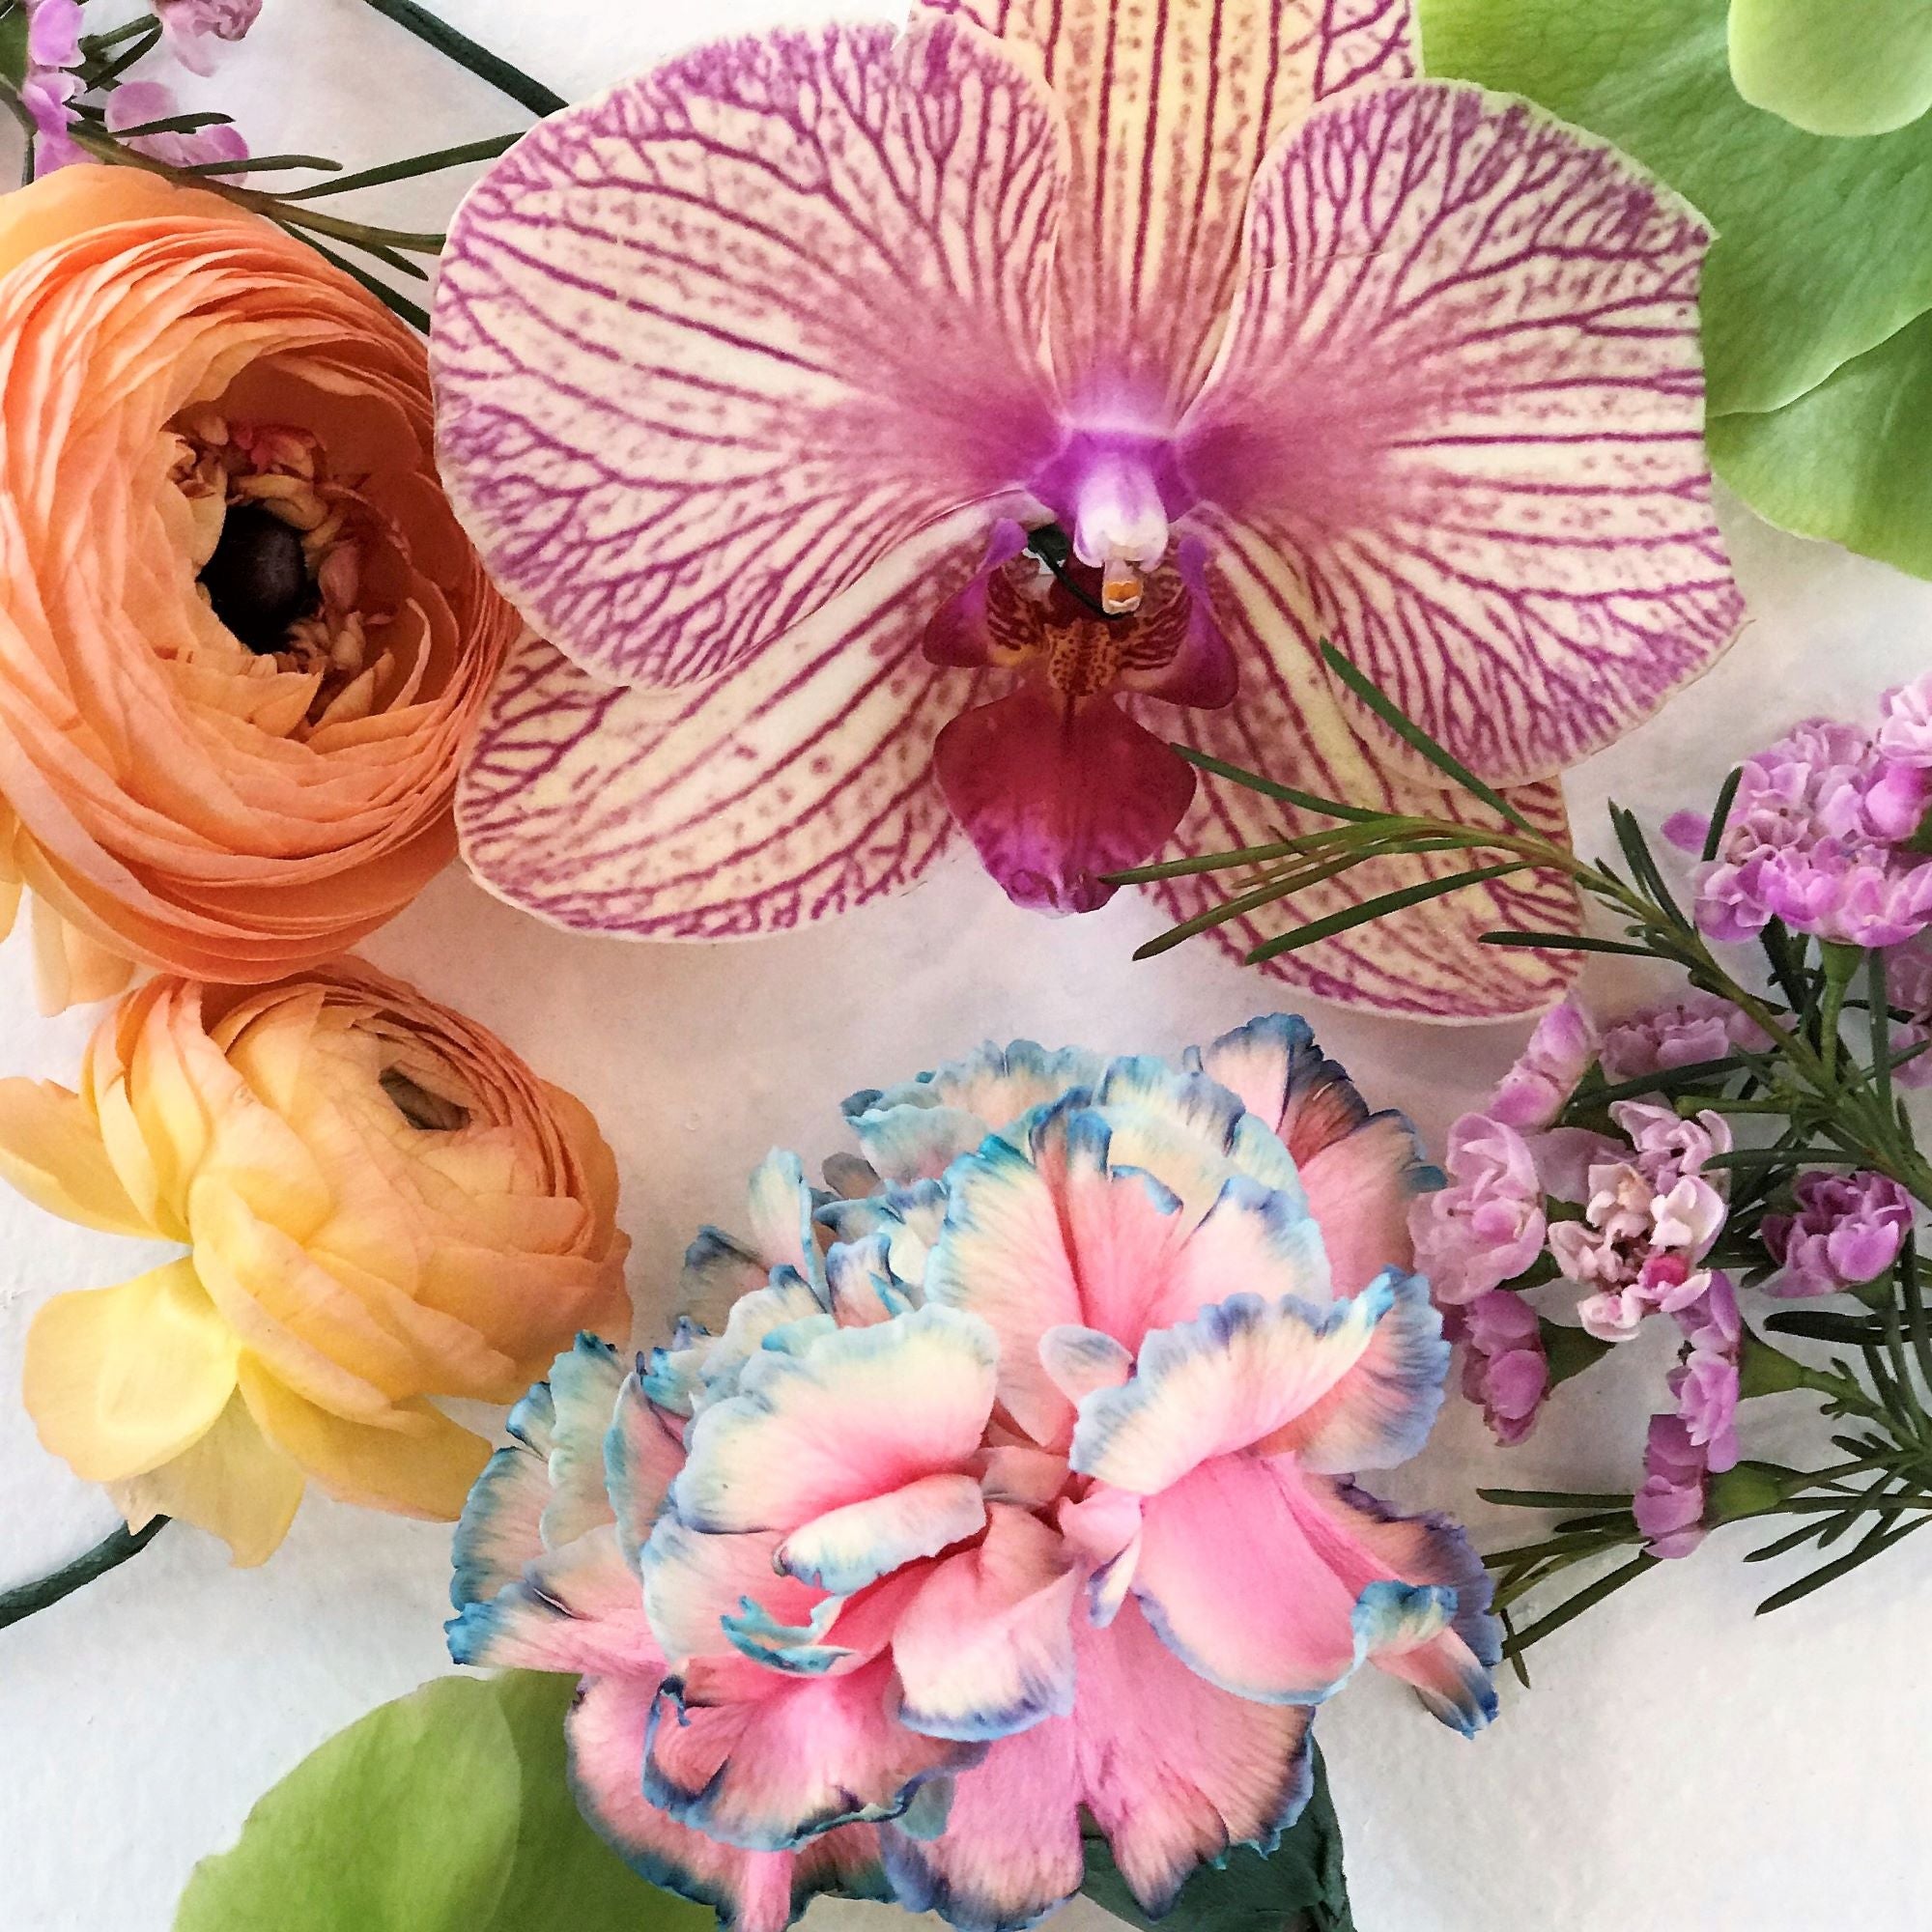 carnation, ranunculus and orchids in a flat lay a la carte weddings